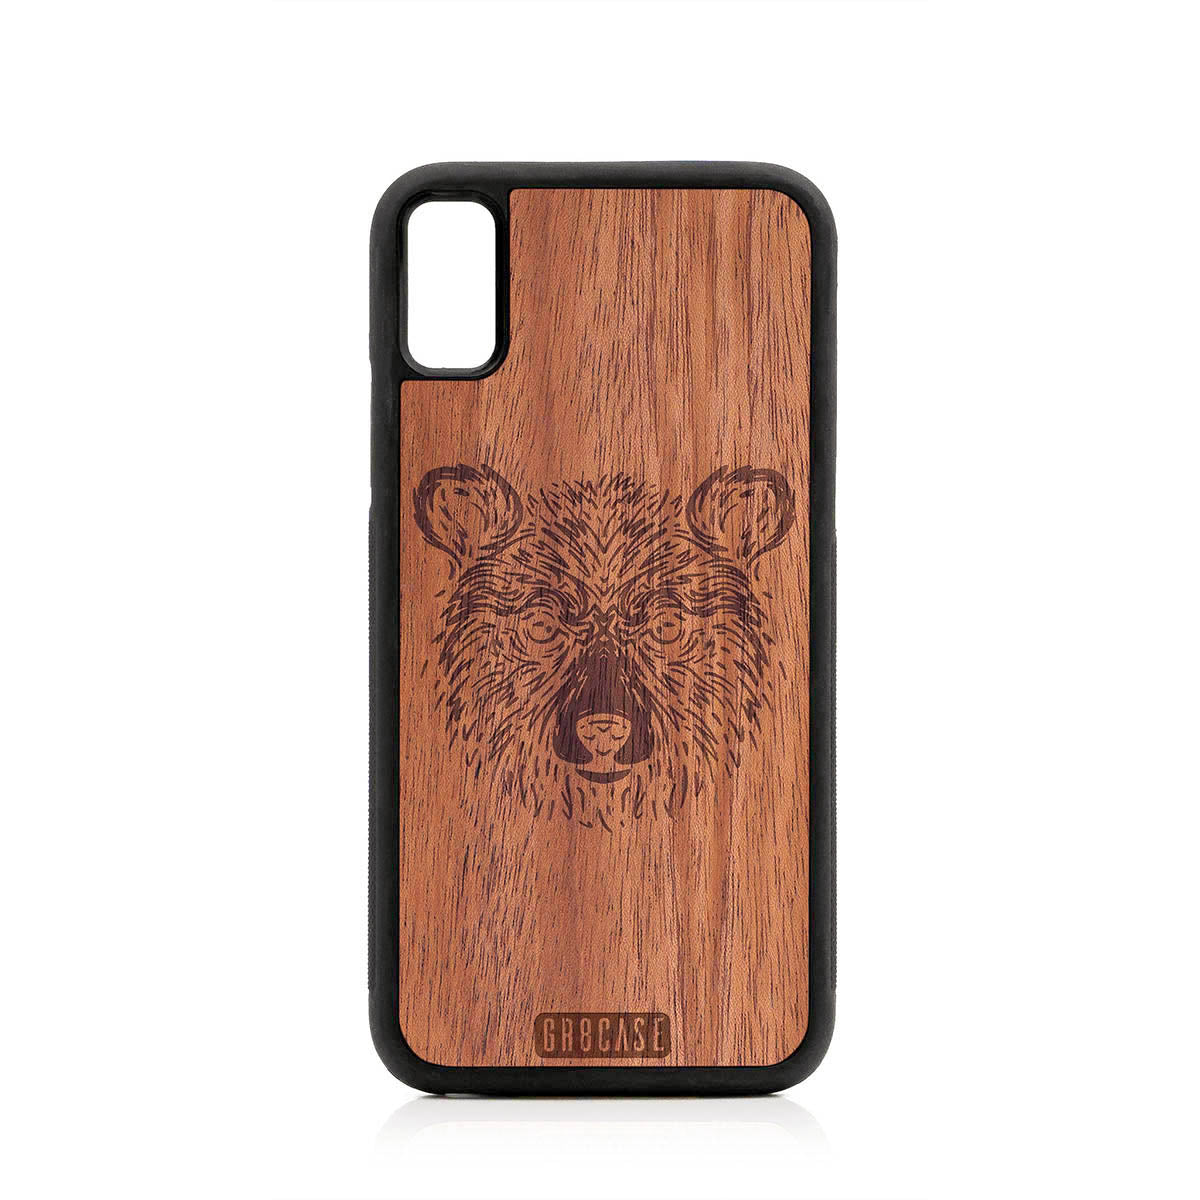 Furry Bear Design Wood Case For iPhone XR